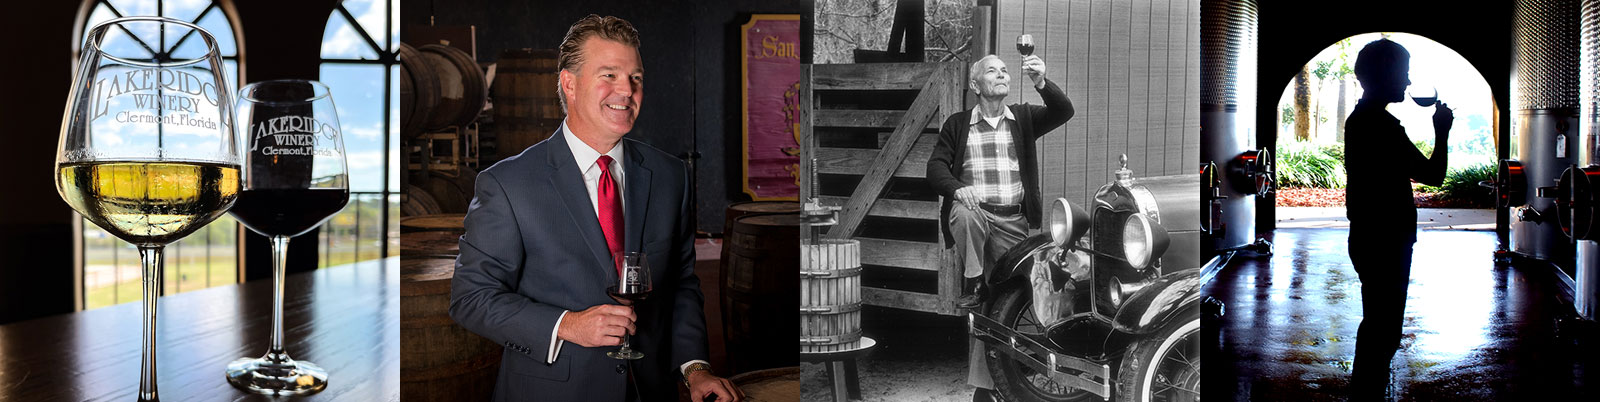 Collage of images showing the winery founders enjoying wine.